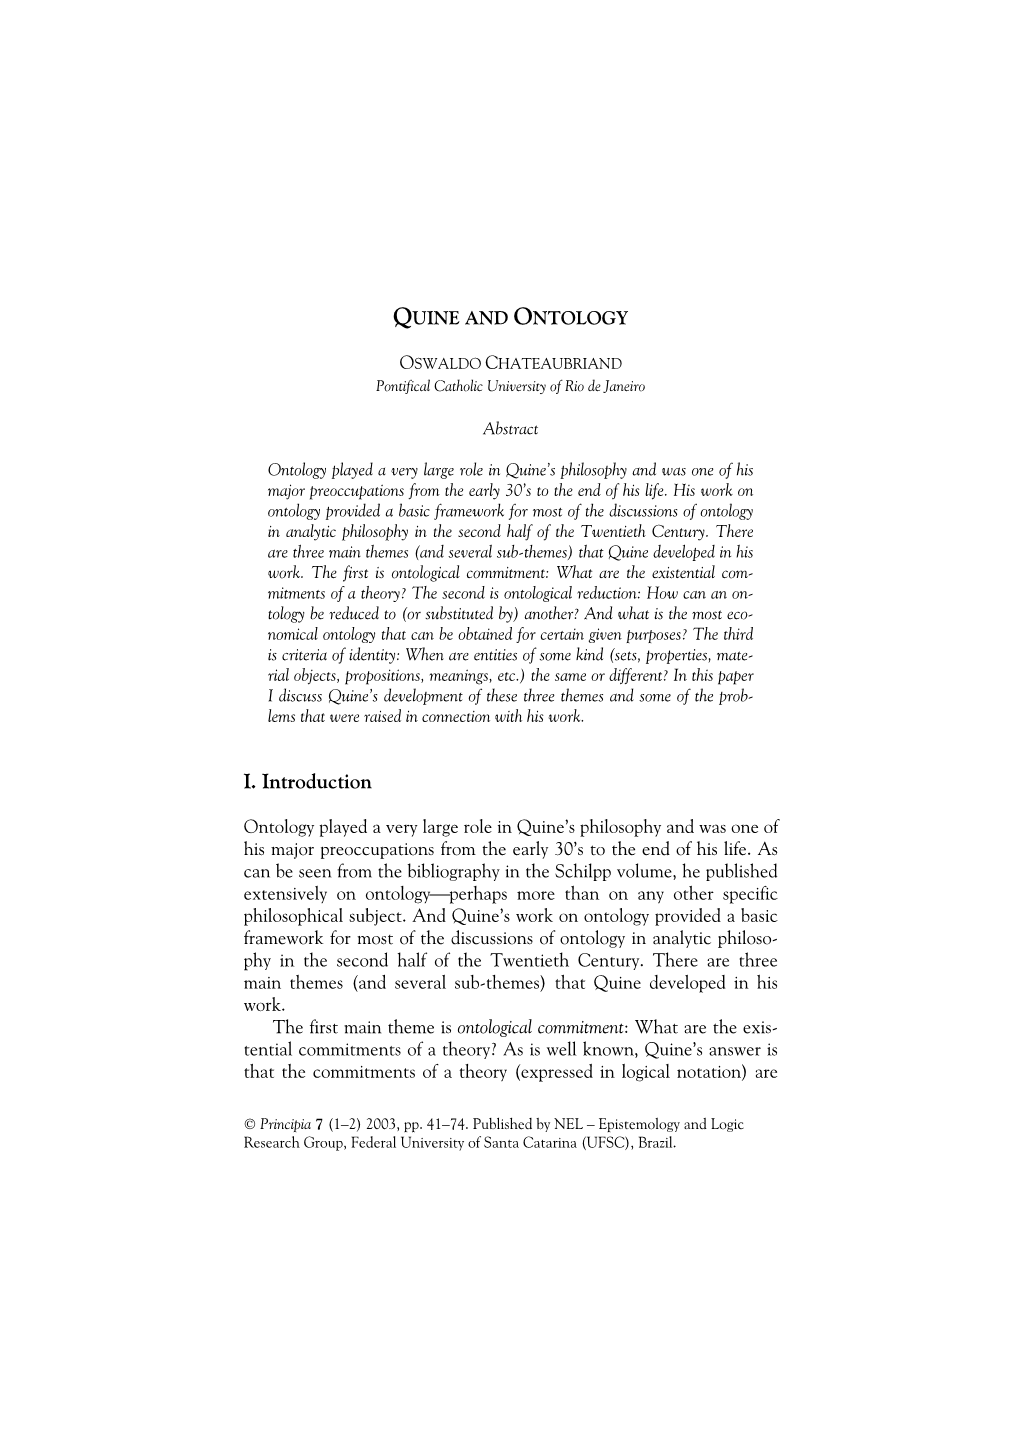 Quine and Ontology